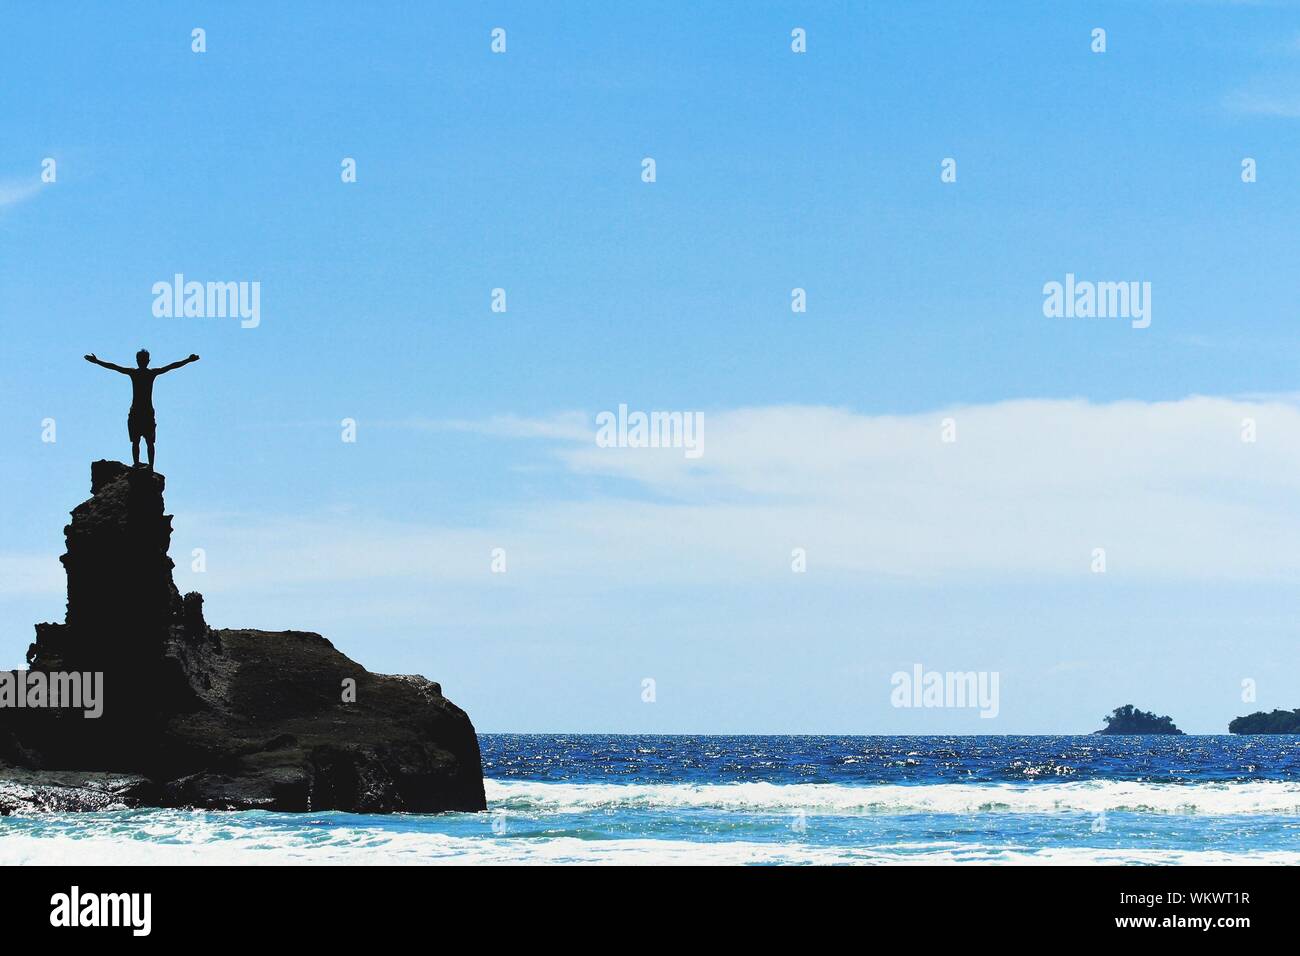 Man With Arms Outstretched On Cliff By The Sea Stock Photo